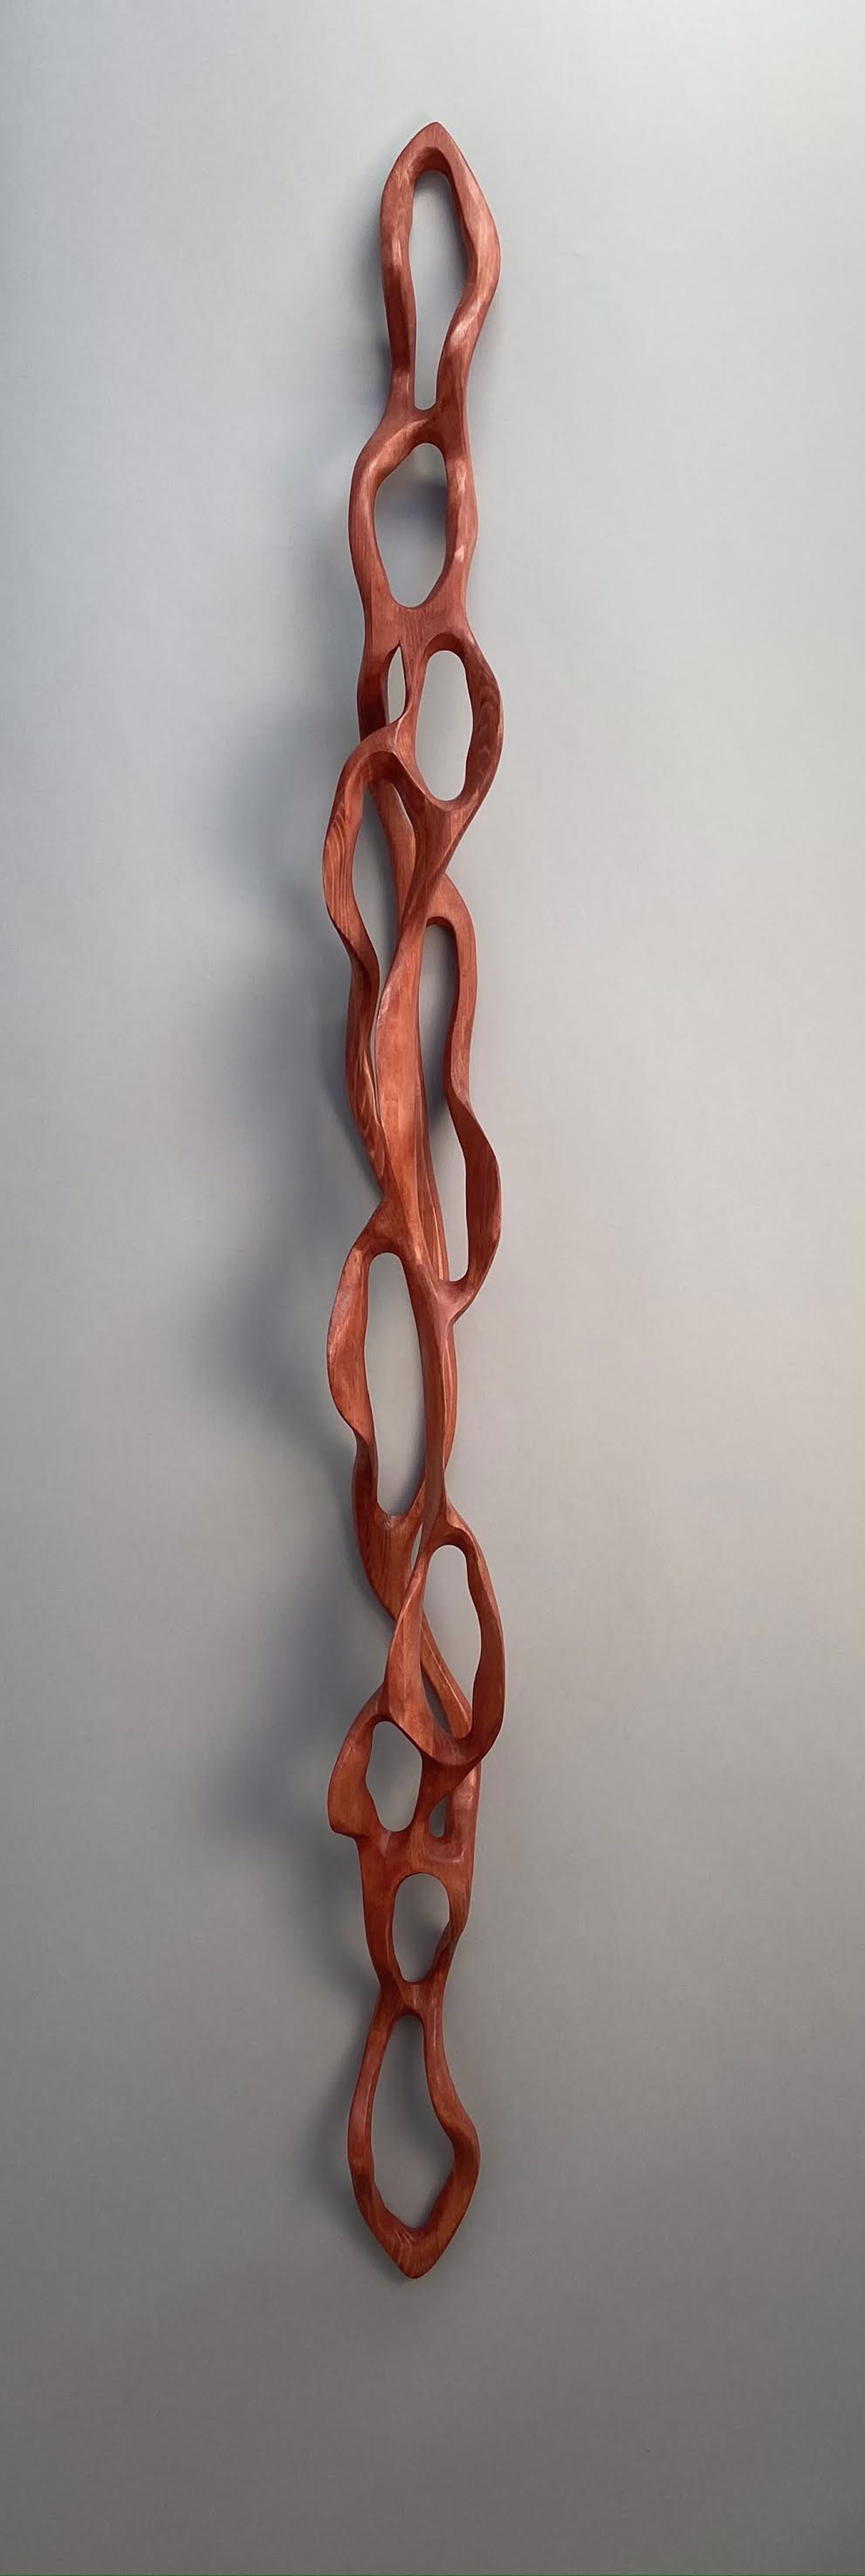 Red Brick Linear Loop by Caprice Pierucci